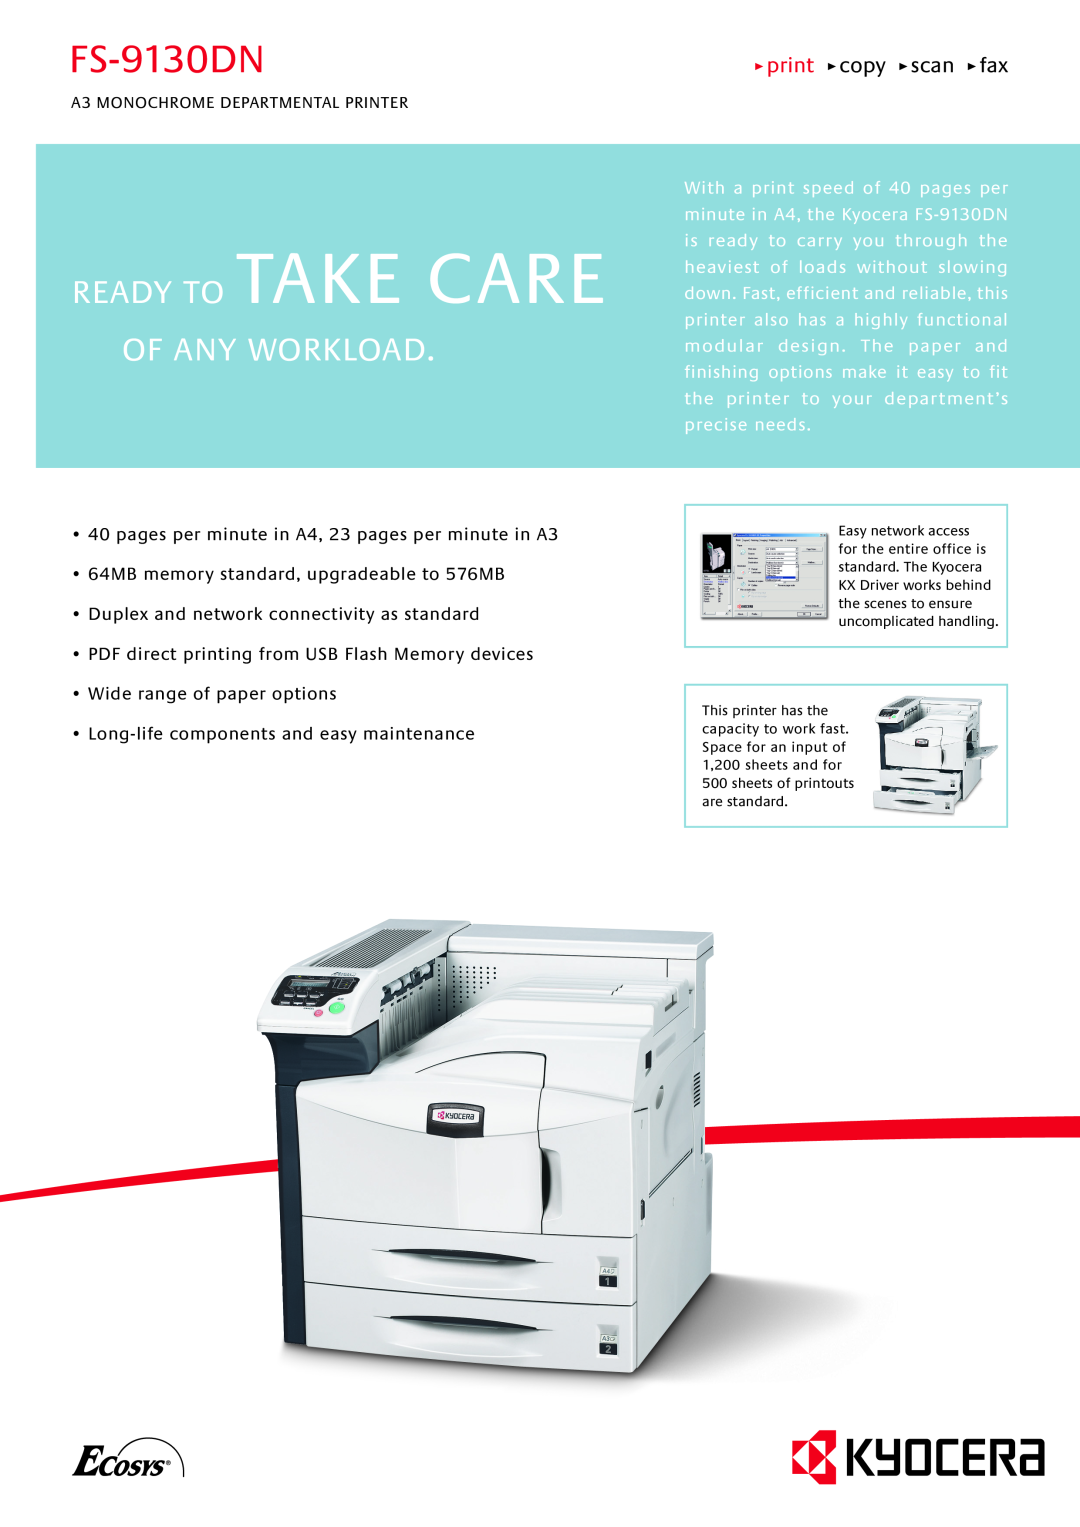 Kyocera FS-9130DN manual Ready To Take Care Of Any Workload, print copy scan fax 